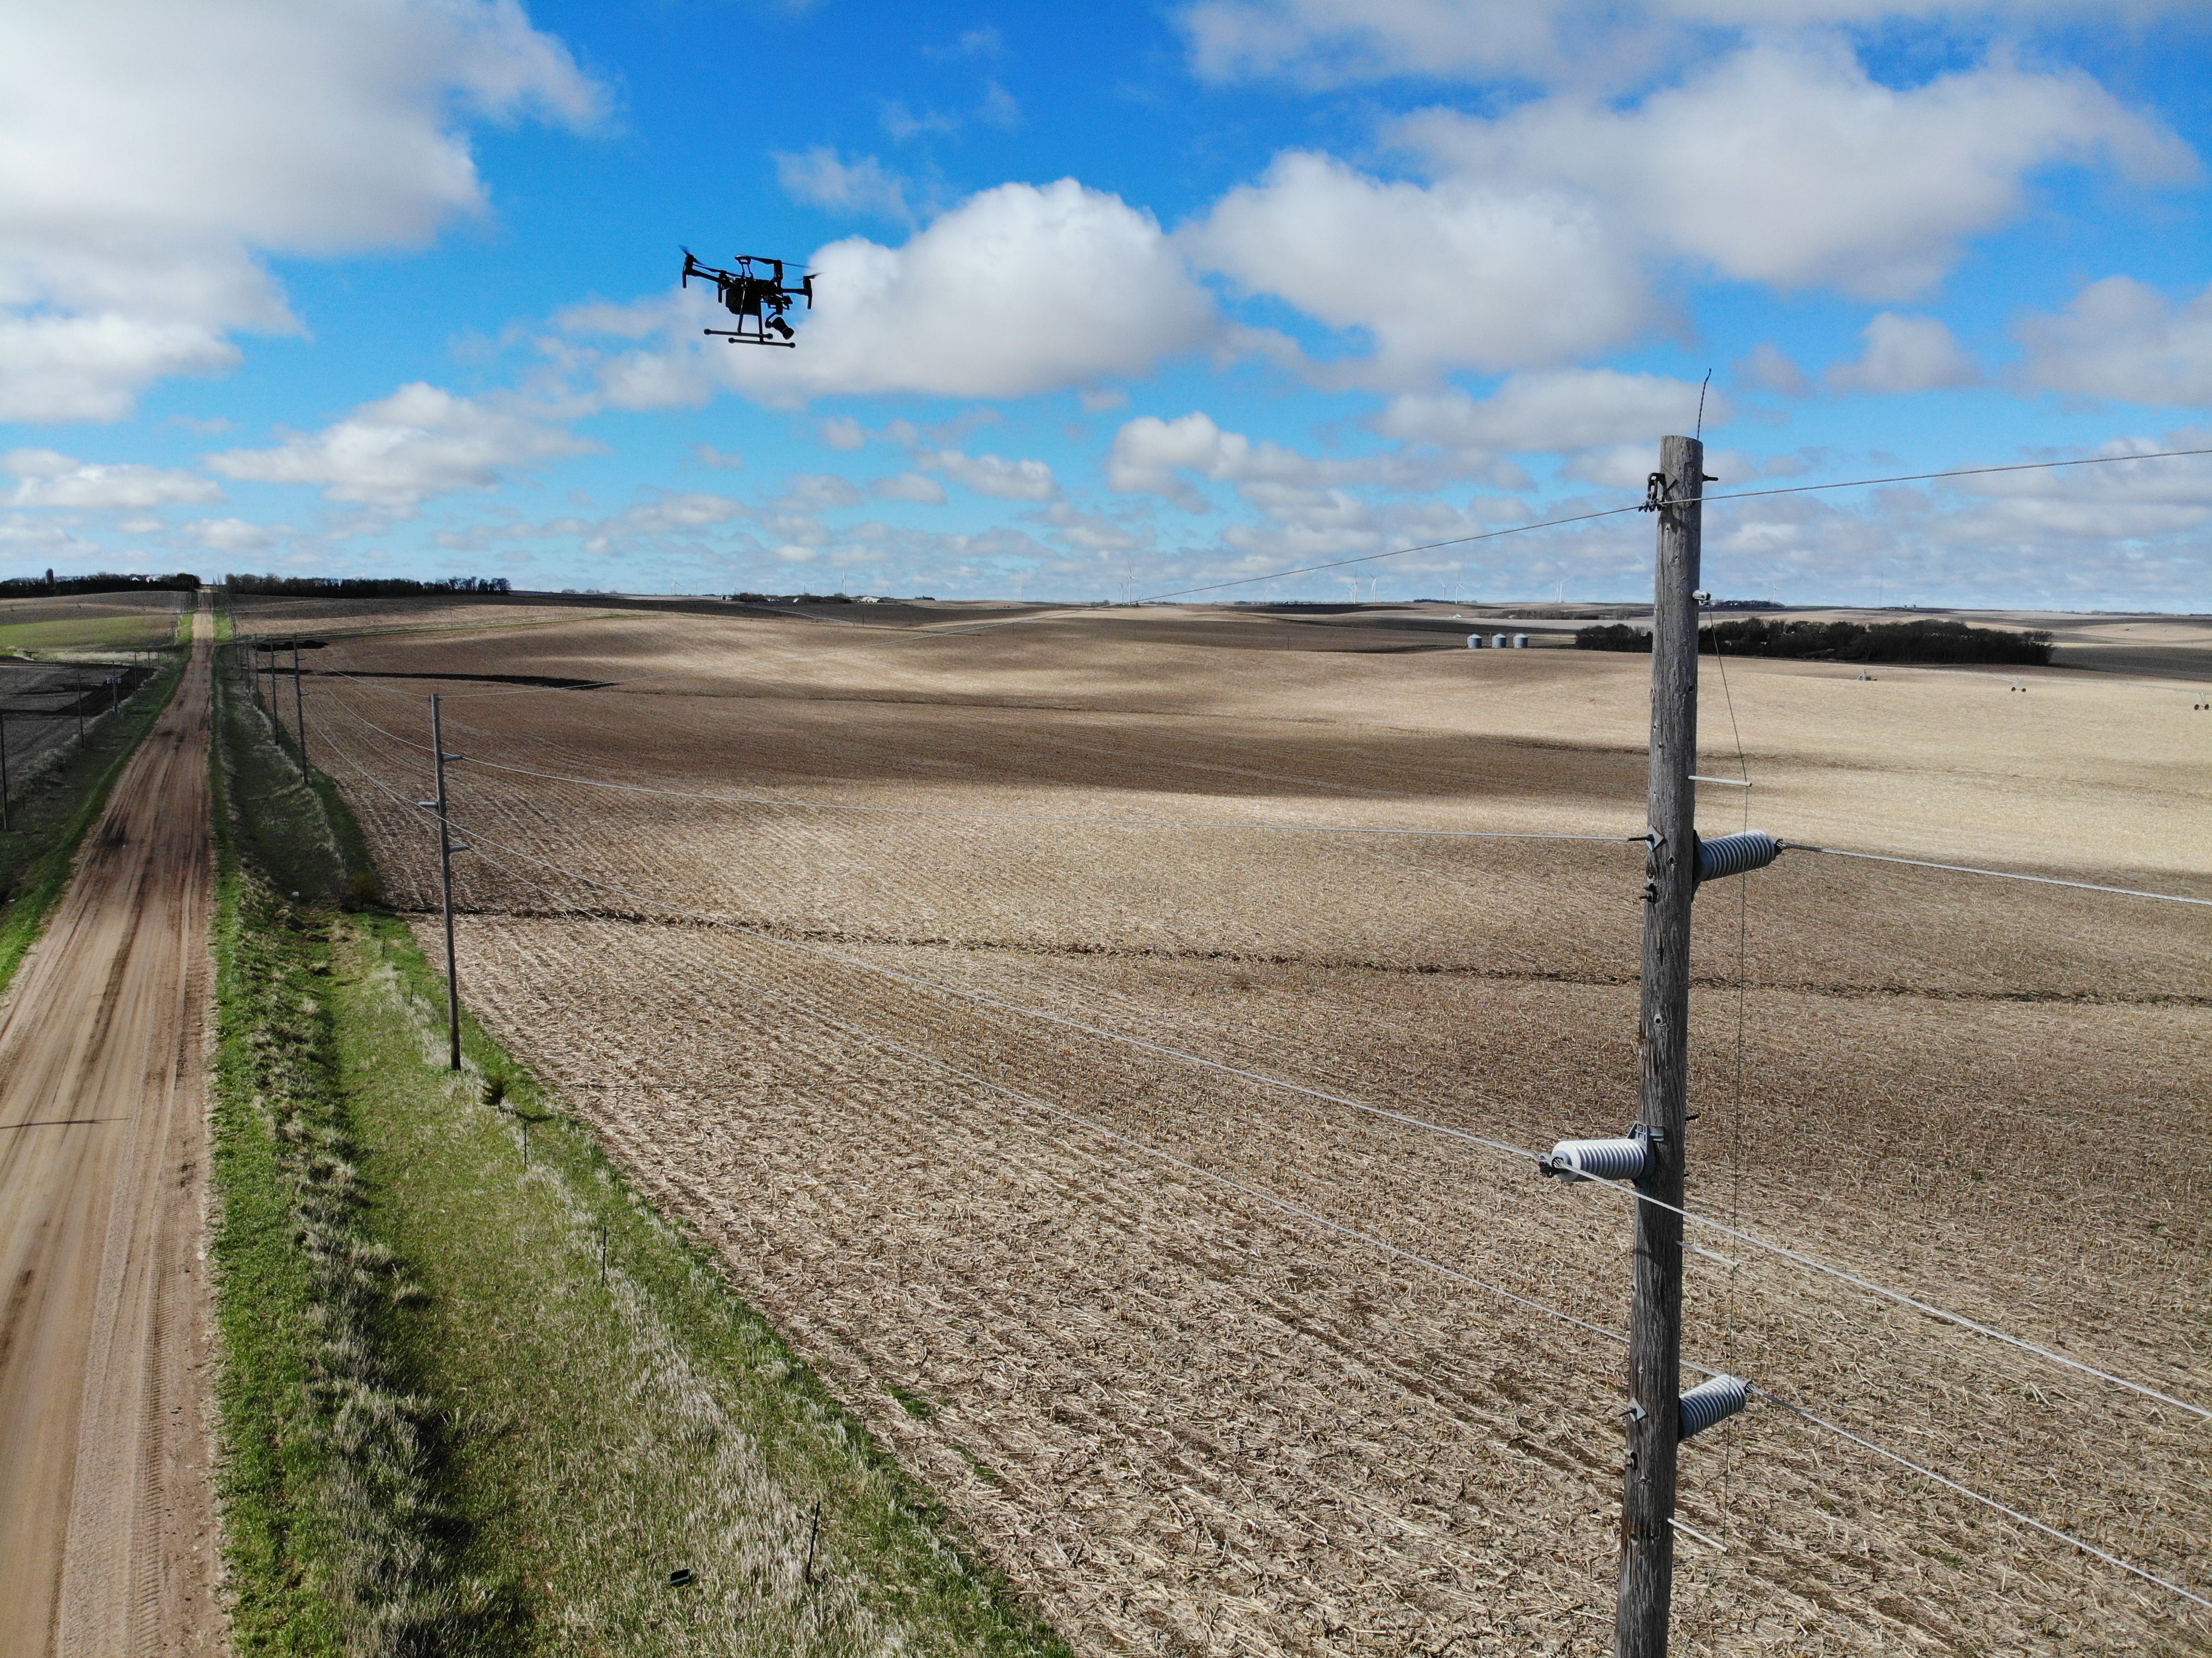 Drone inspecting electric power transmission line